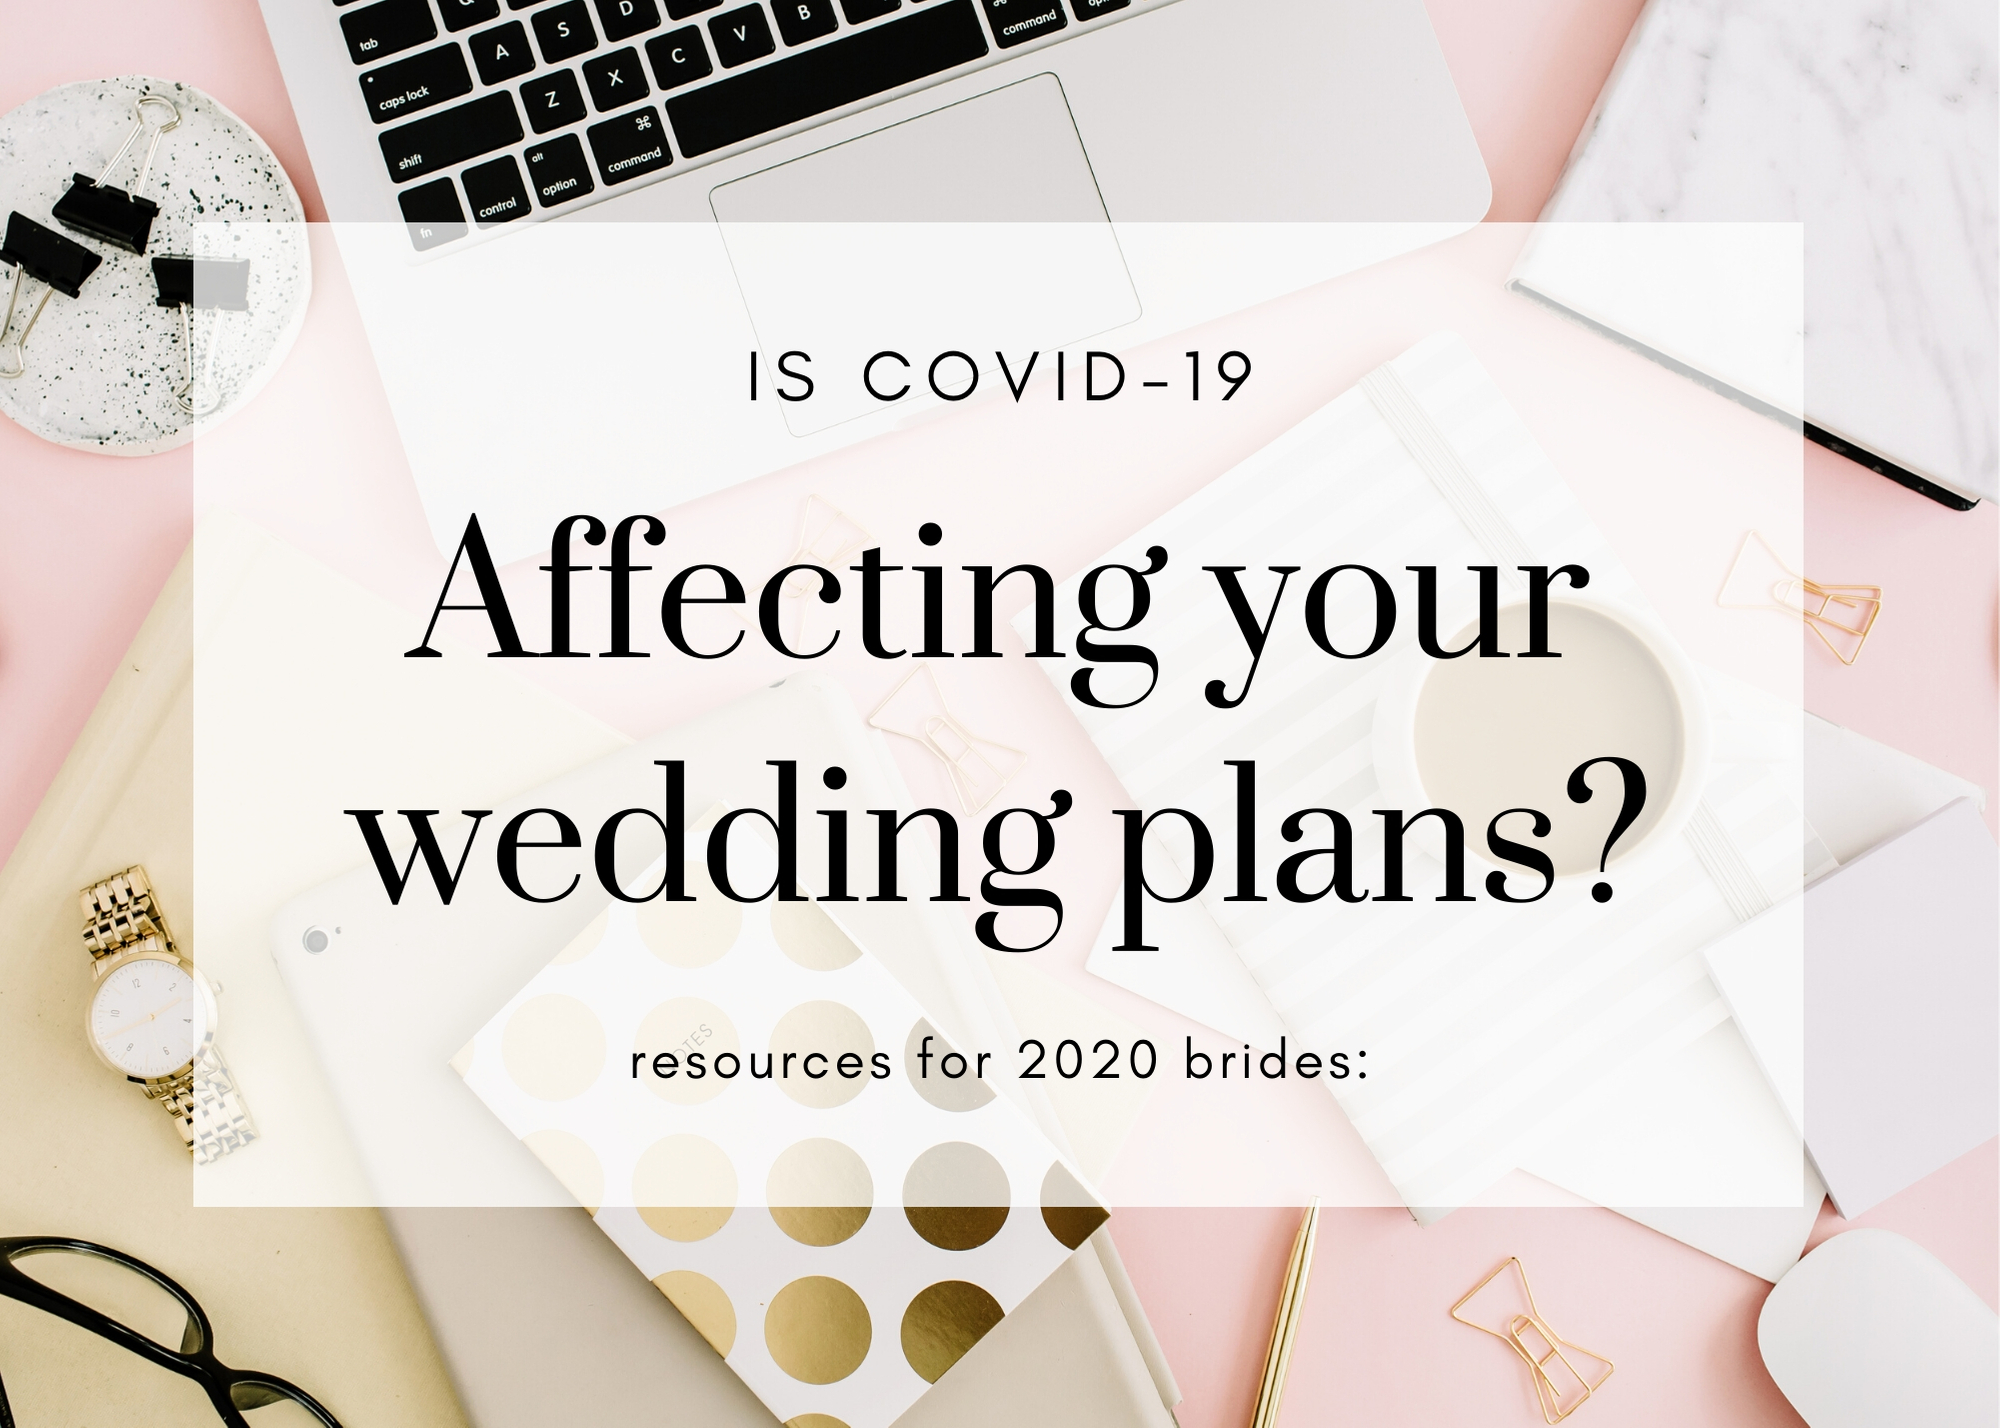 is covid-19 affecting your wedding?